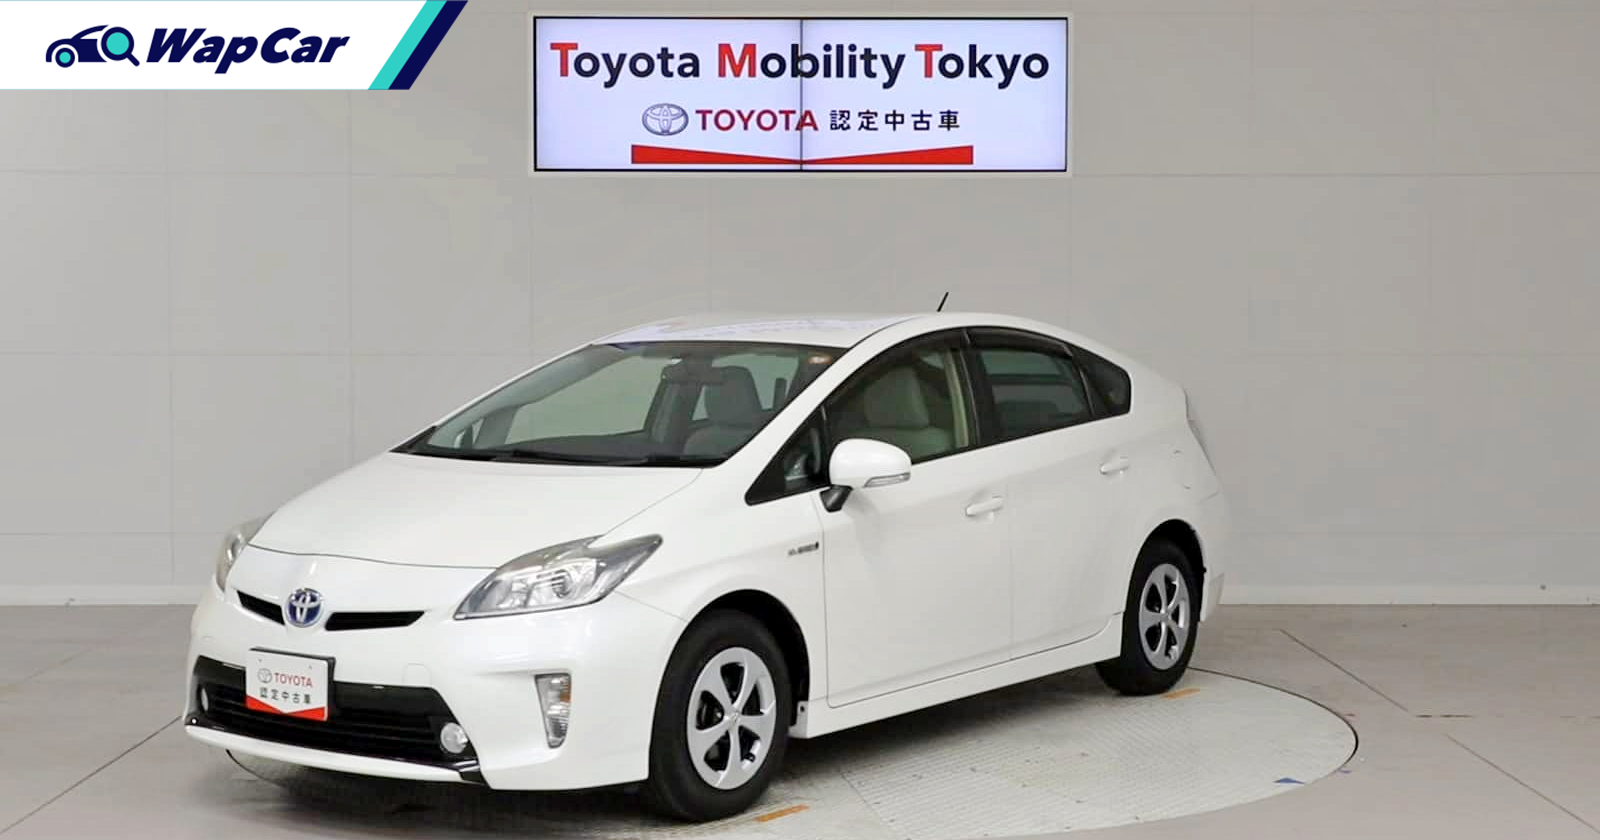 Petrol prices in Japan soared to RM 5.40 per litre, resale value of Toyota Prius rising in tandem